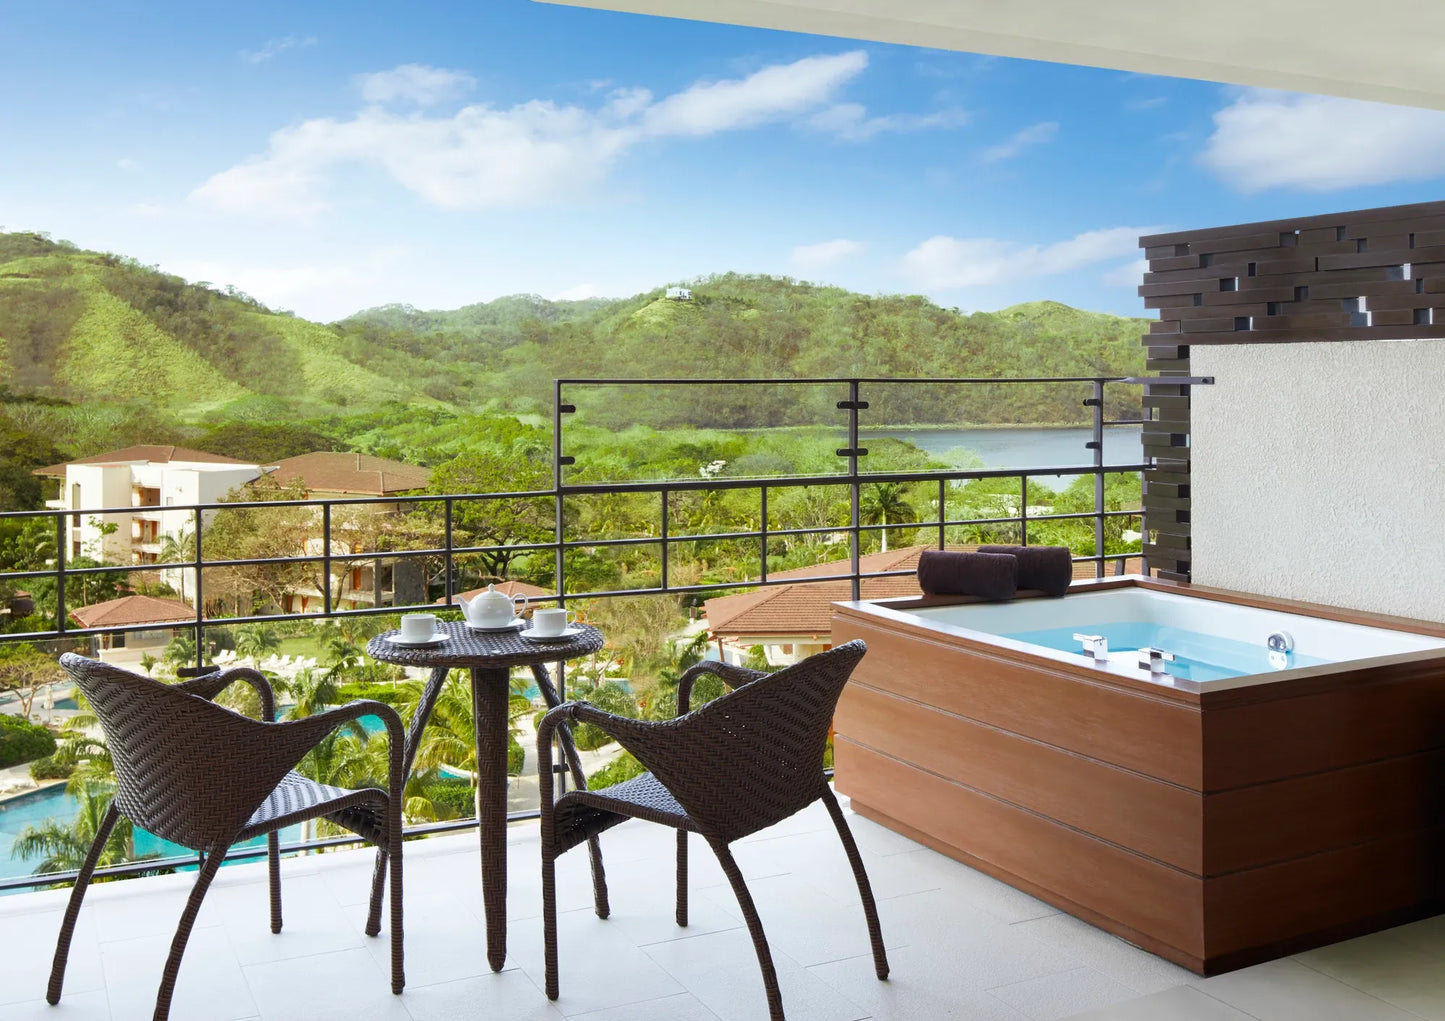 Preferred Club Master Suite King Tropical View - Costa Rica 2025